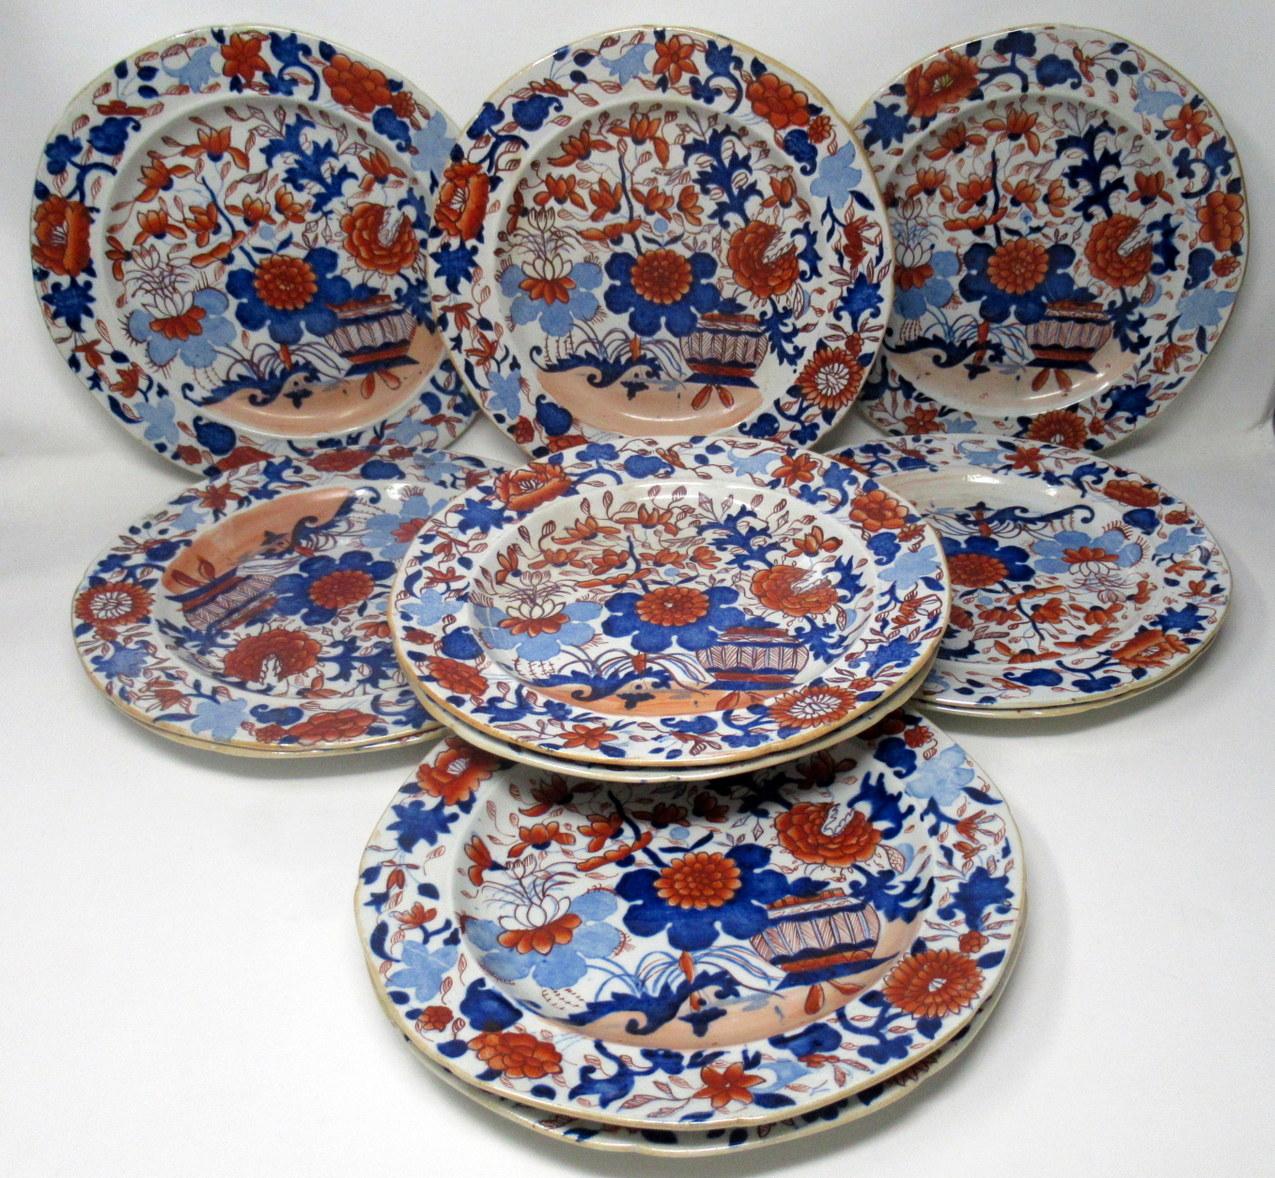 An exceptionally fine set of twelve English Masons hand painted Imari cabinet plates. First quarter of the 19th century. 

Each hand painted in the Japanese Imari palette depicting a jardinière surrounded by flowers, leaves and branches in colors